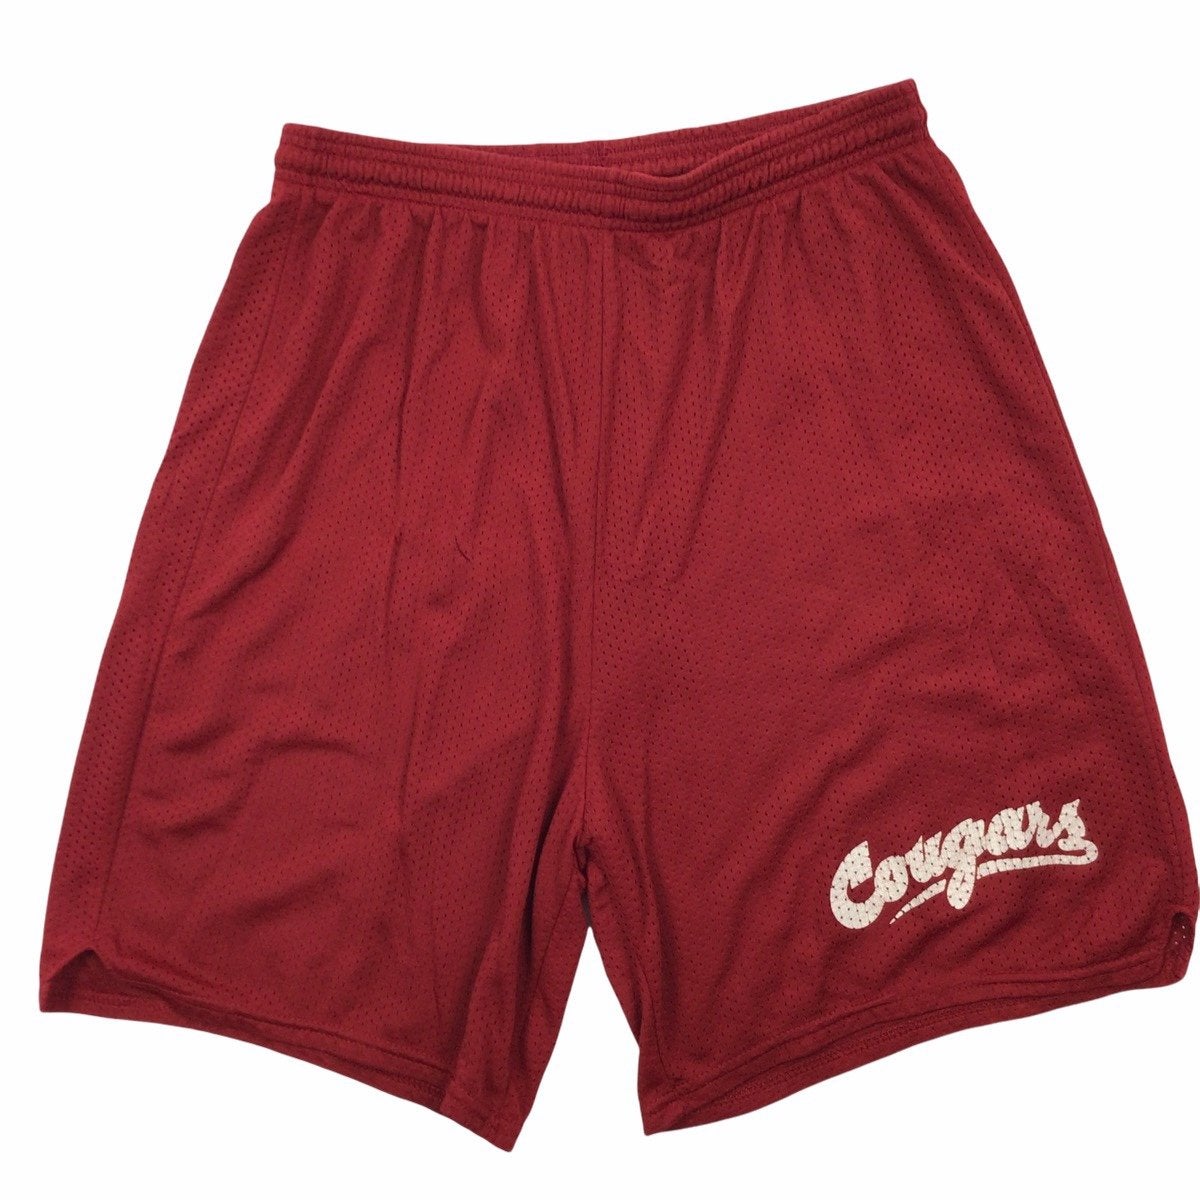 Red Basketball Shorts for sale | New and Used on SidelineSwap